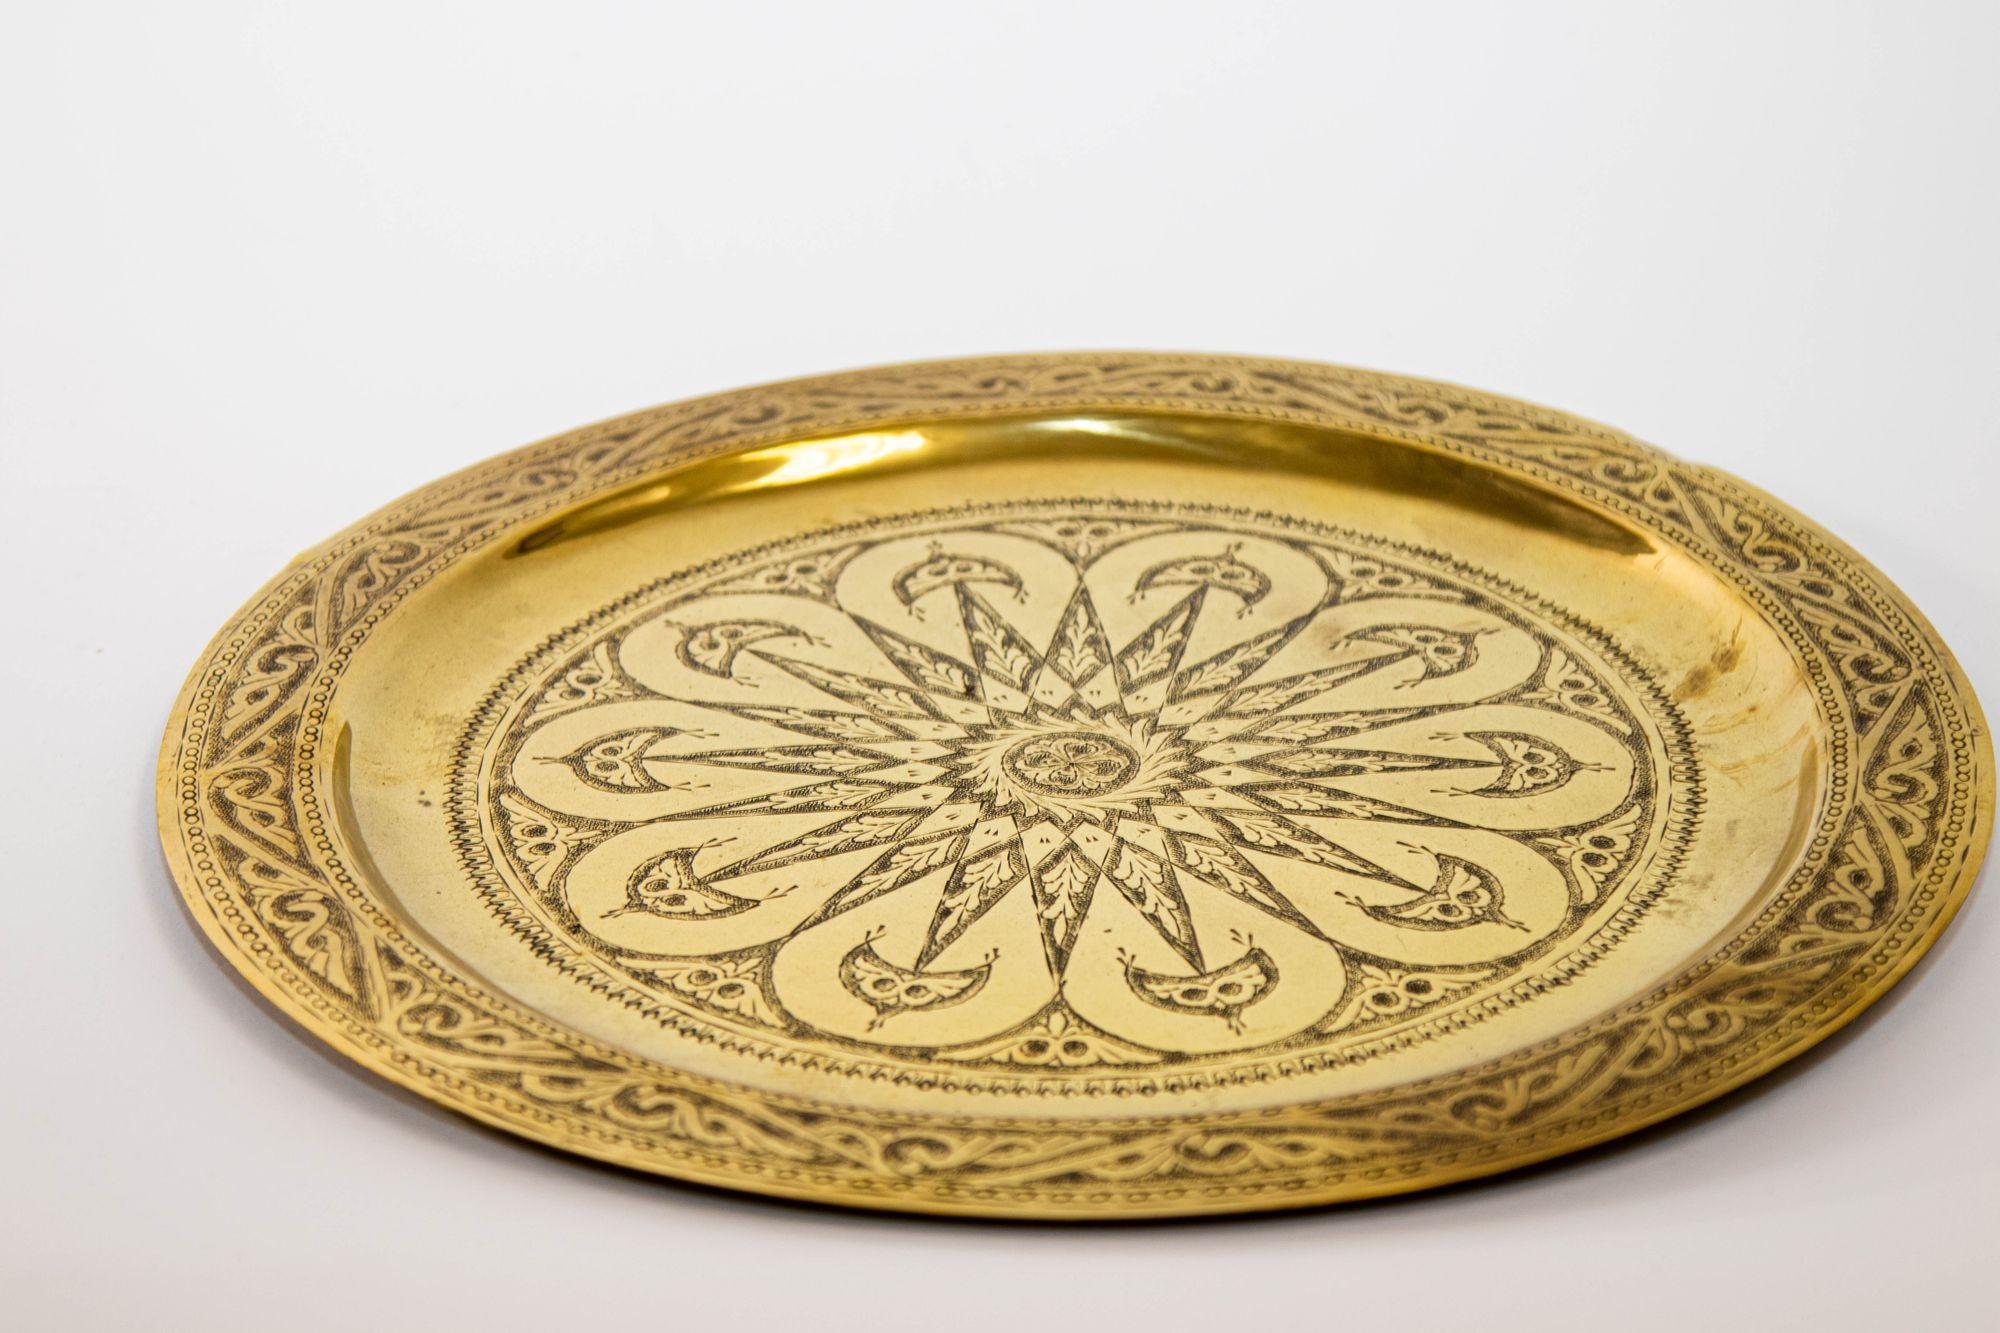 1940s Moroccan Brass Tray Polished Collectible Islamic Metal Work Platter.
The Islamic polished brass metal work antique brass tray is a remarkable piece of artistry that embodies the rich cultural heritage and skilled craftsmanship of Islamic